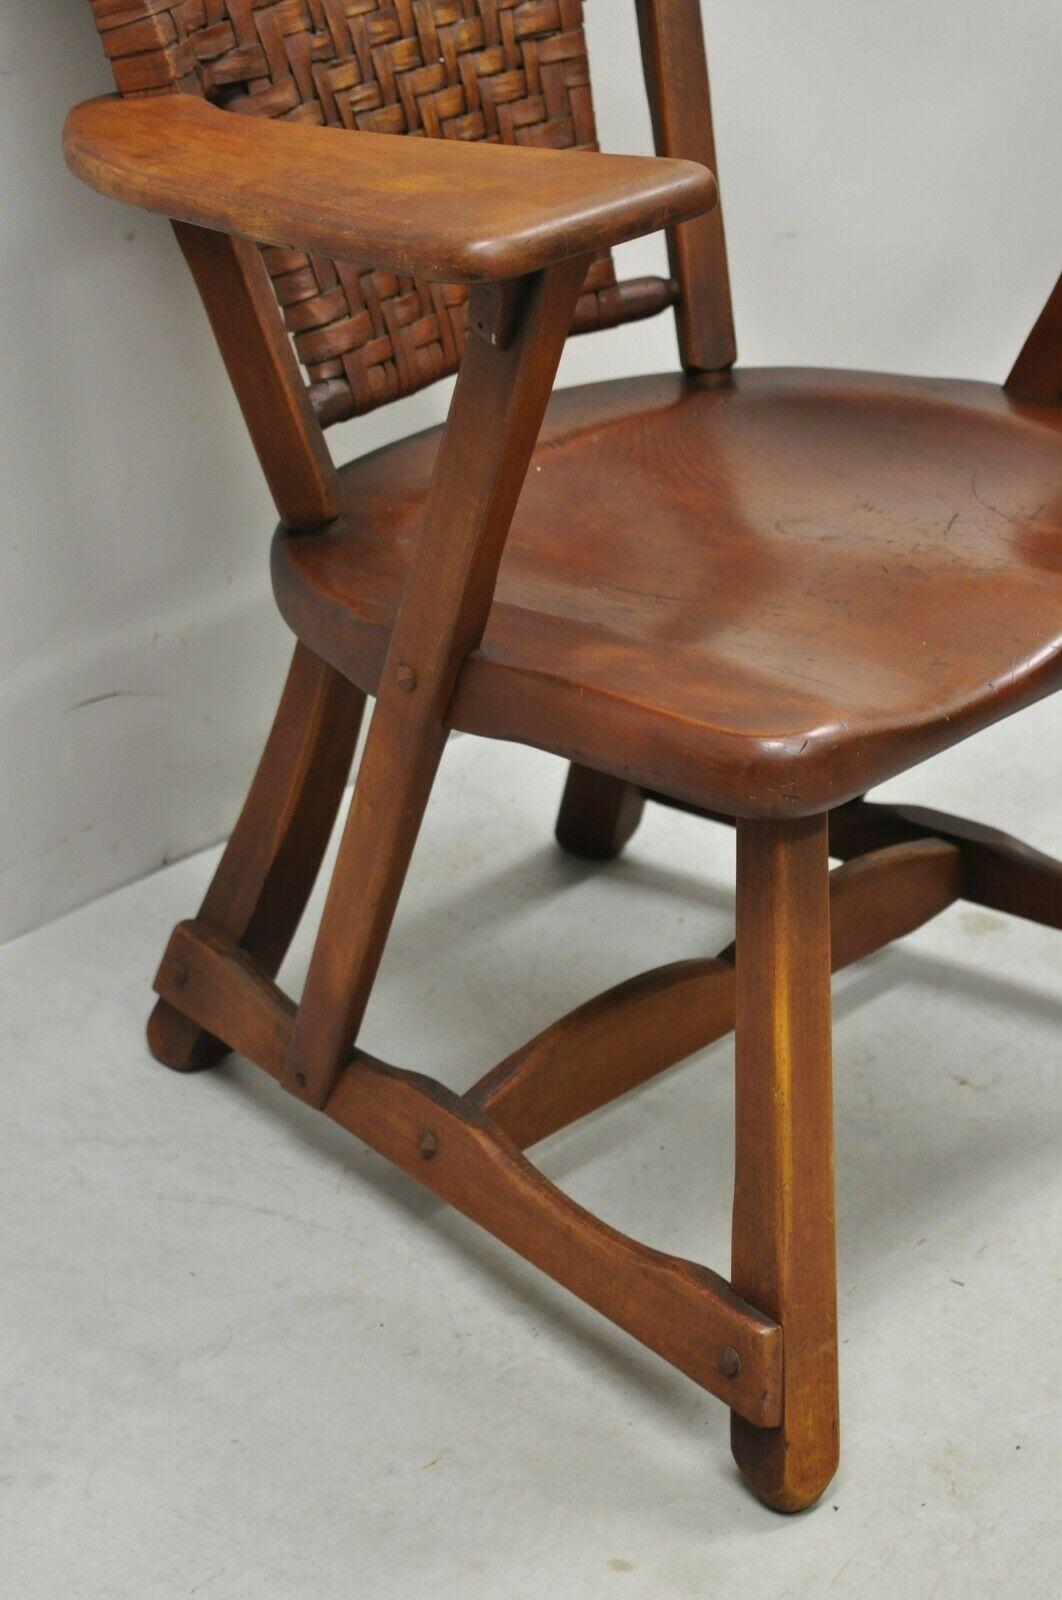 Rustic Old Hickory Paddle Arm American Provincial Woven Arm Chair Martinsville